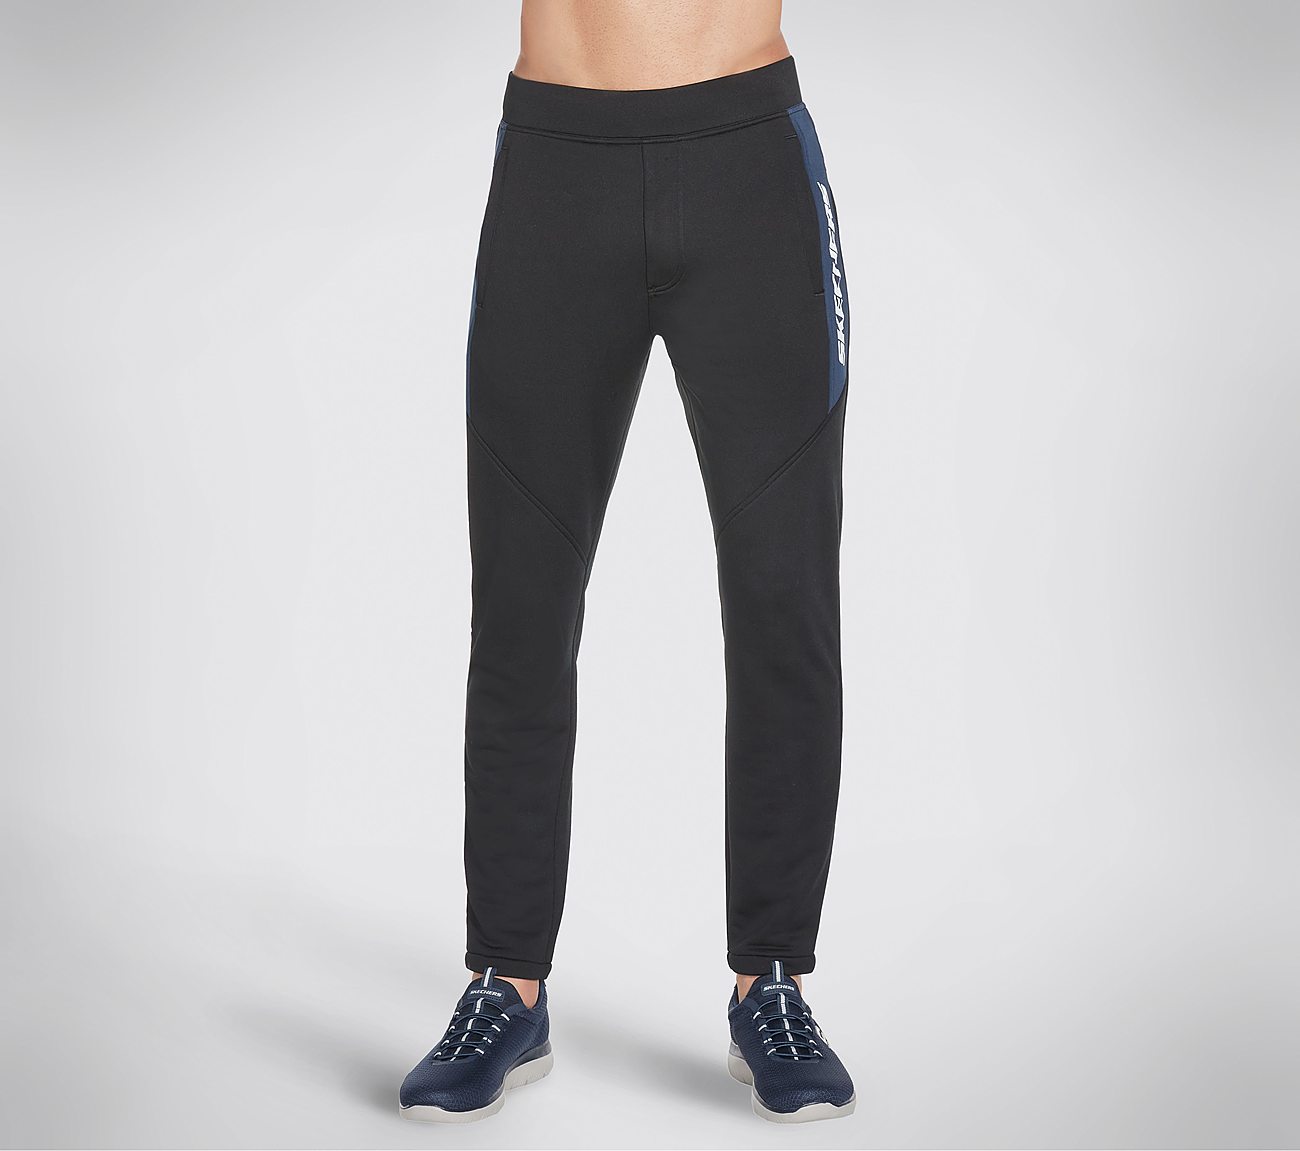 SKECHTECH PANT, BBBBLACK Apparels Lateral View